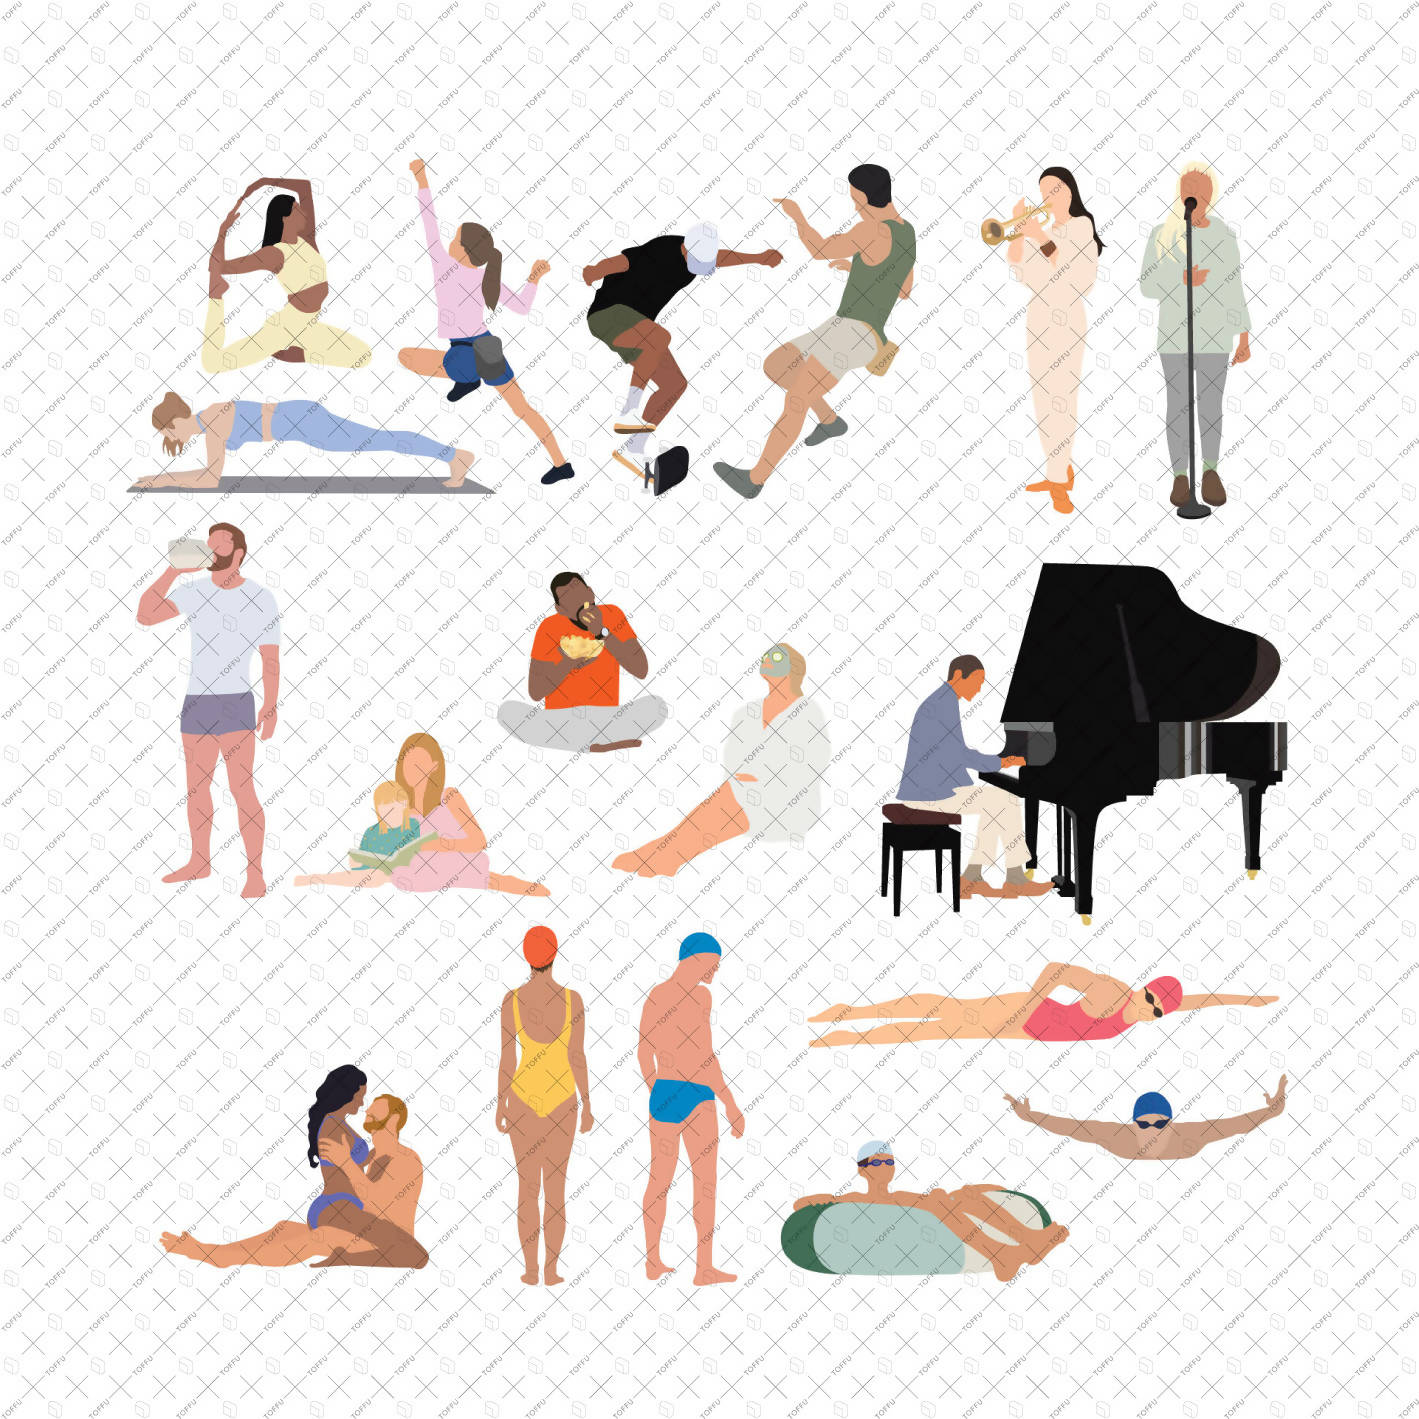 Flat Vector People by Category PNG - Toffu Co